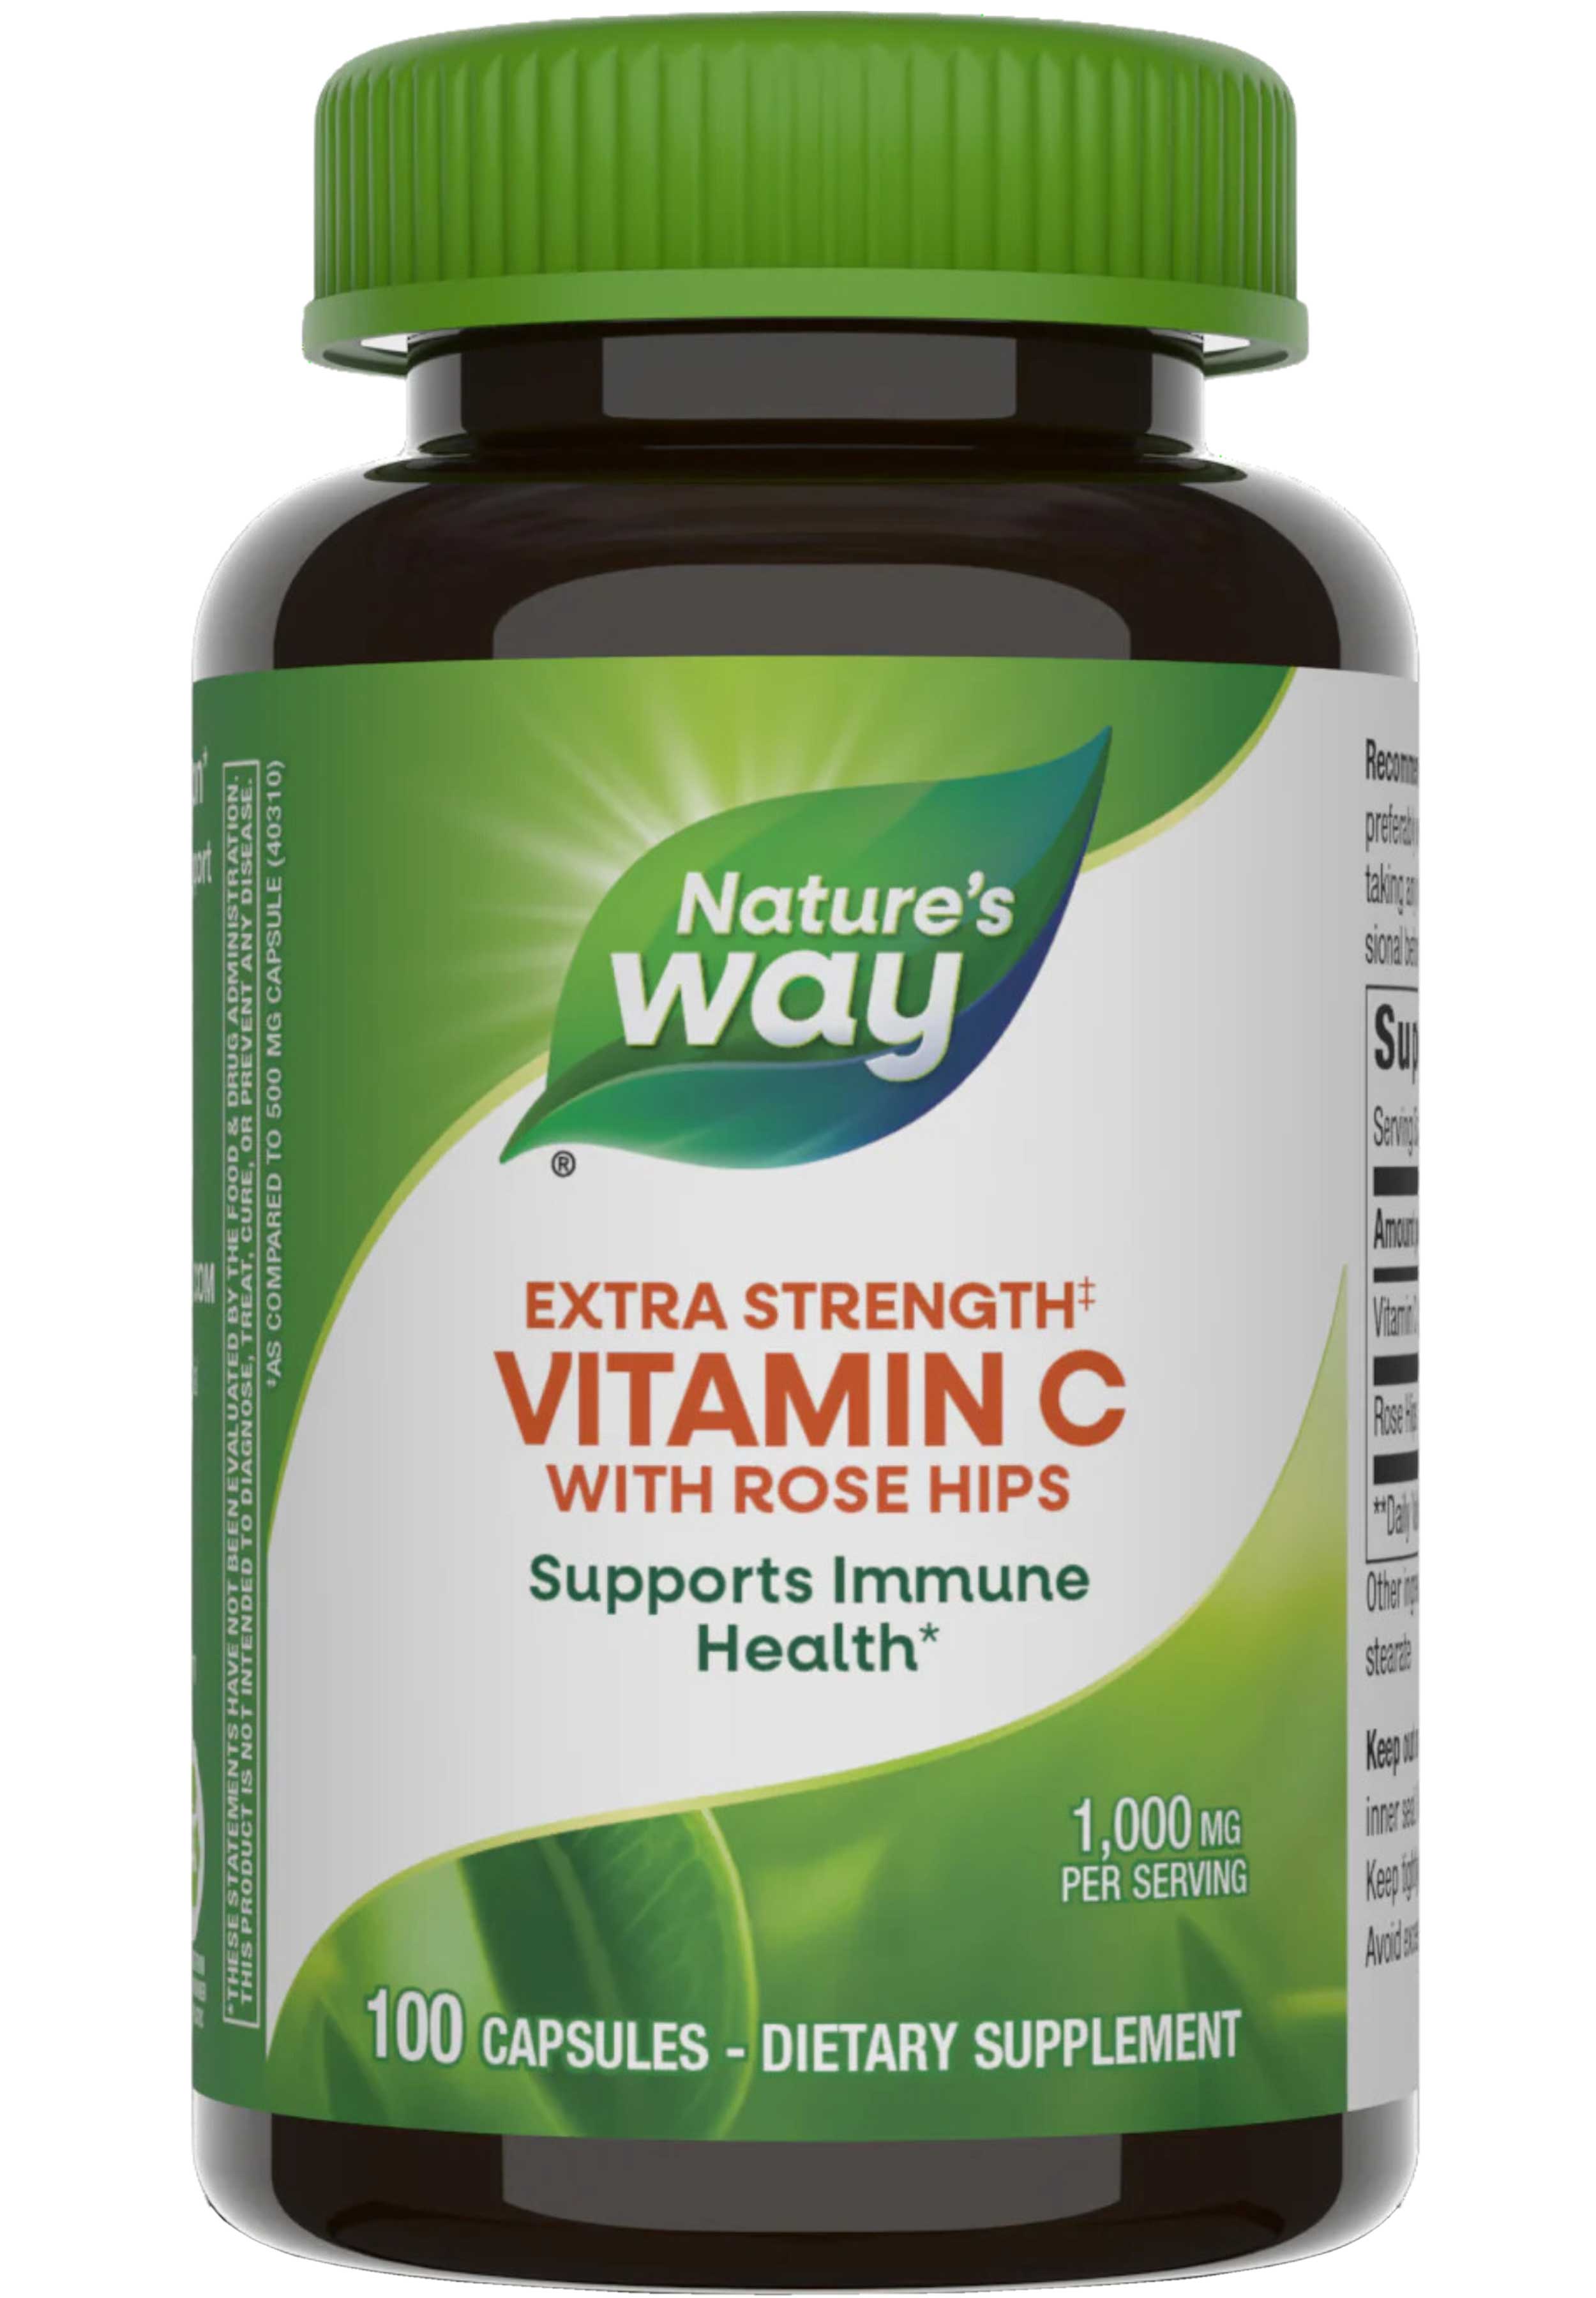 Nature's Way Vitamin C with Rose Hips Extra Strength